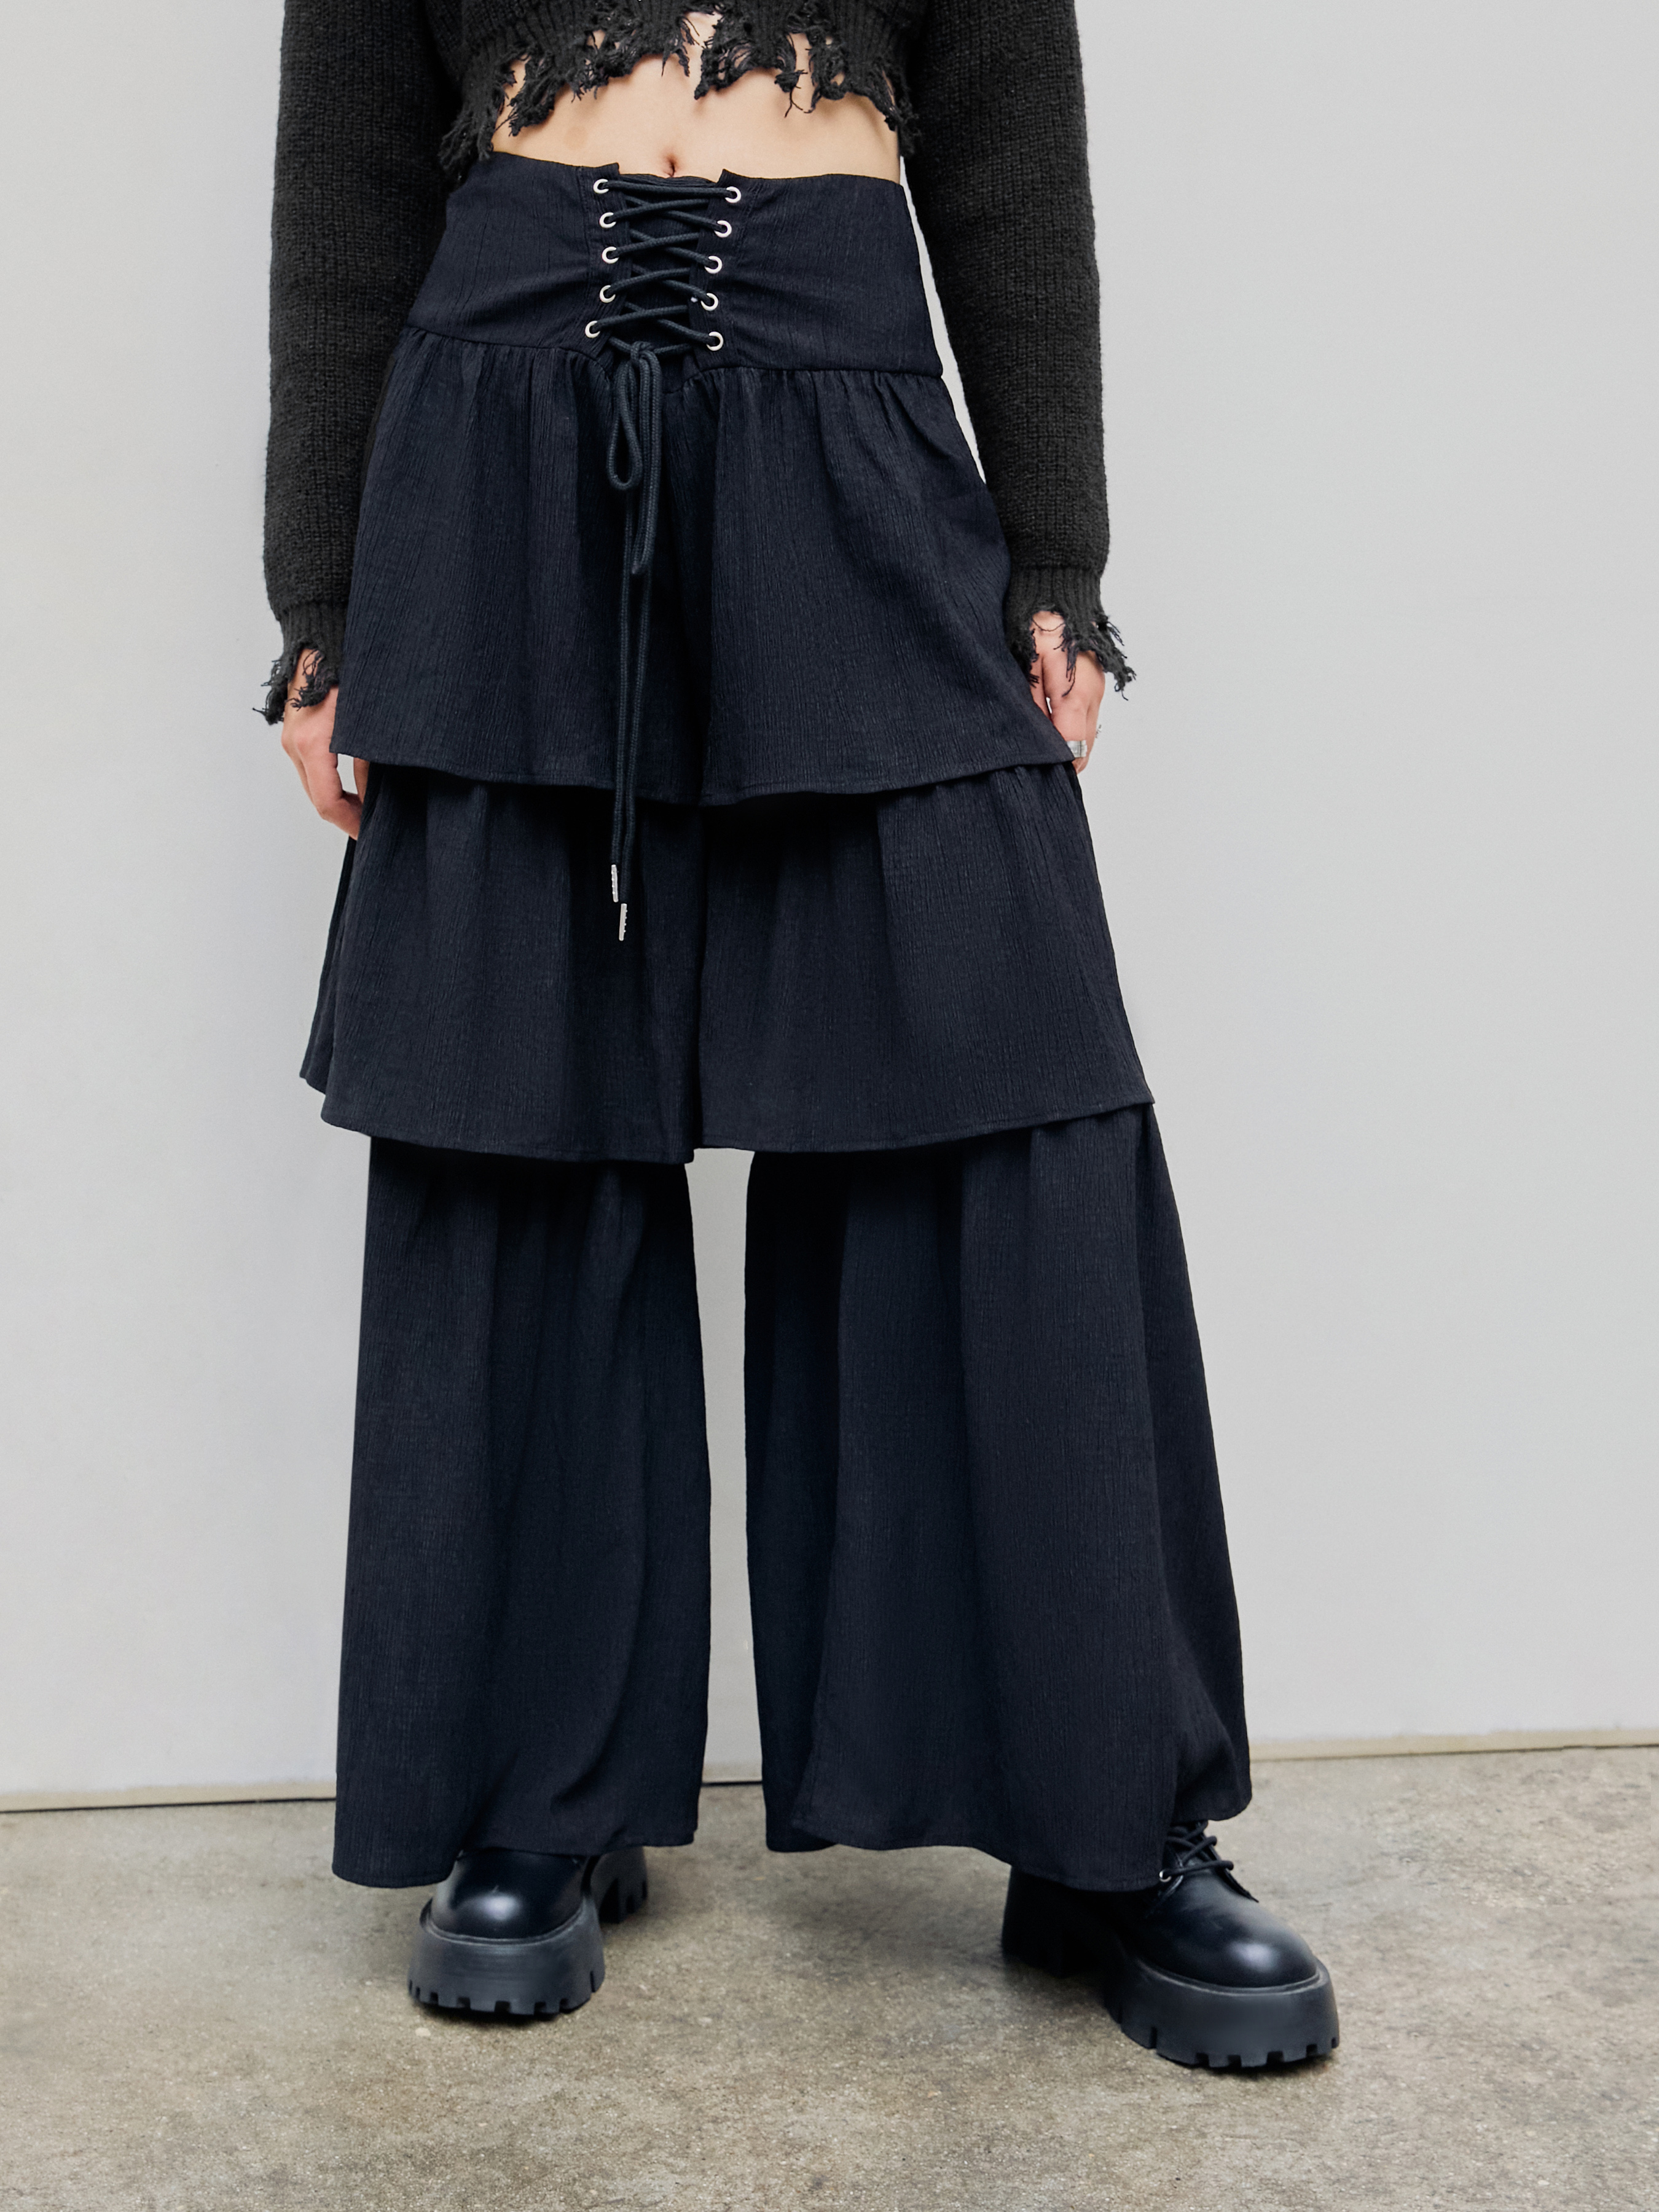 CONCEPTO high-waisted Ruffled Palazzo Trousers - Farfetch